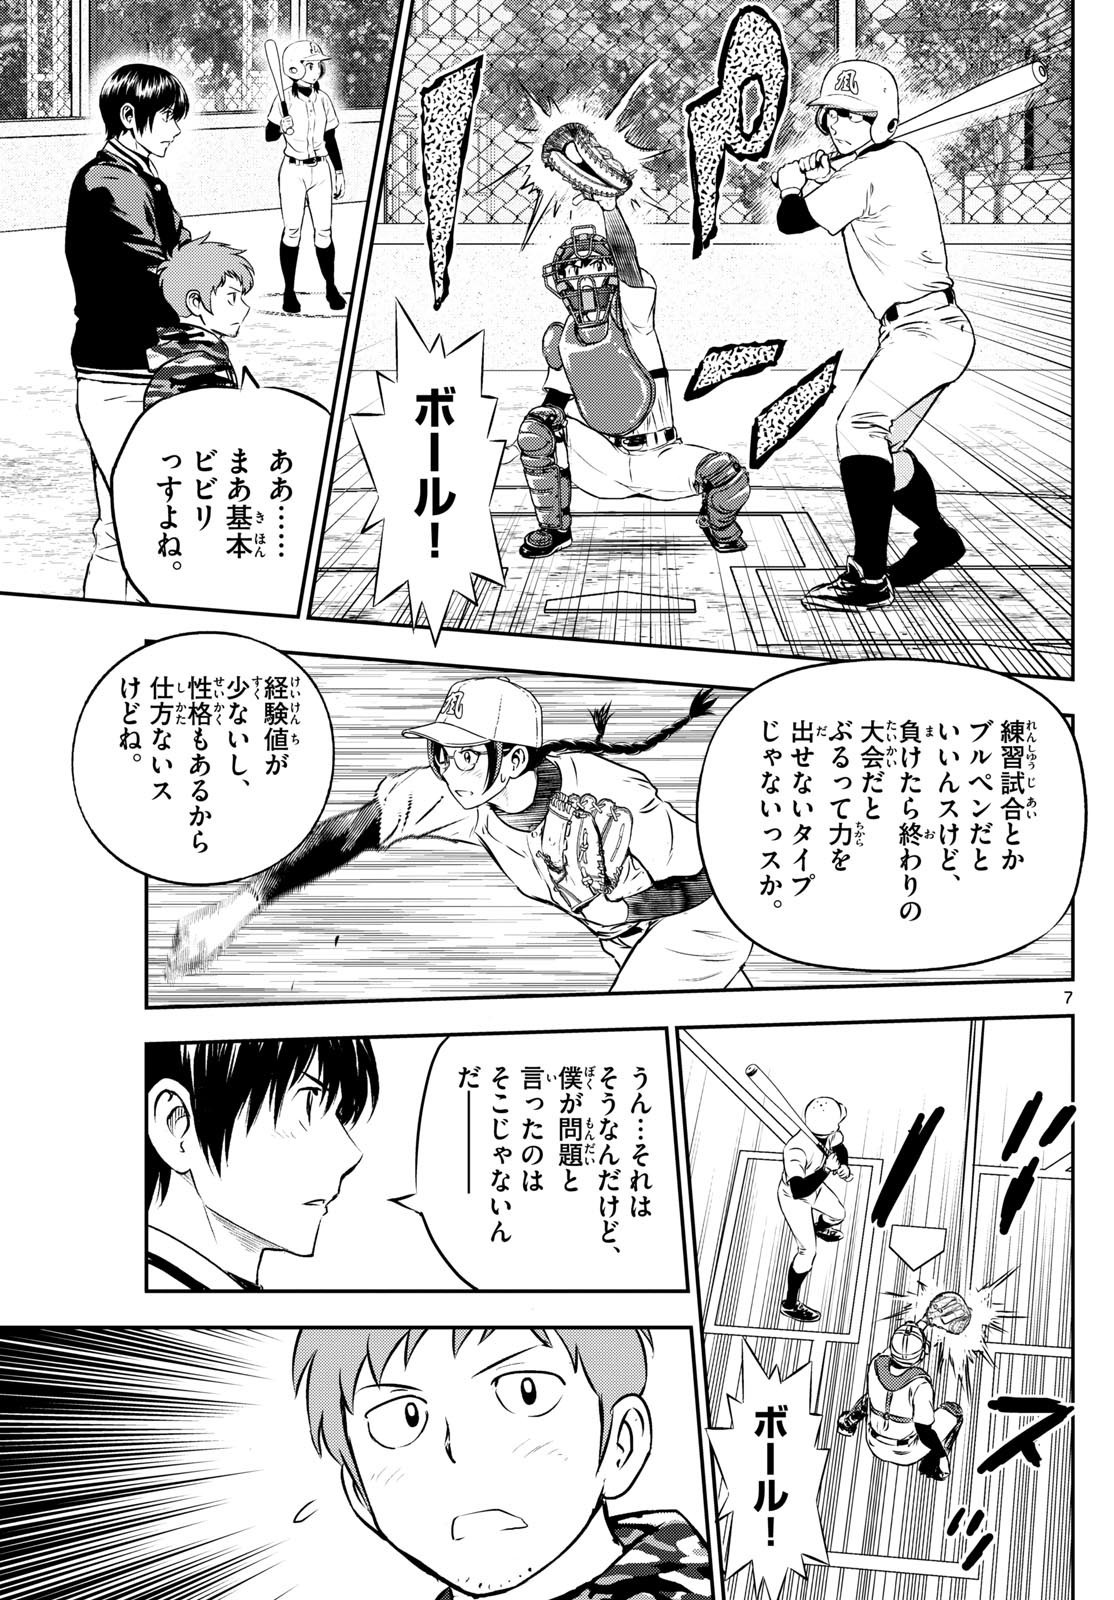 Major 2nd - メジャーセカンド - Chapter 282 - Page 7